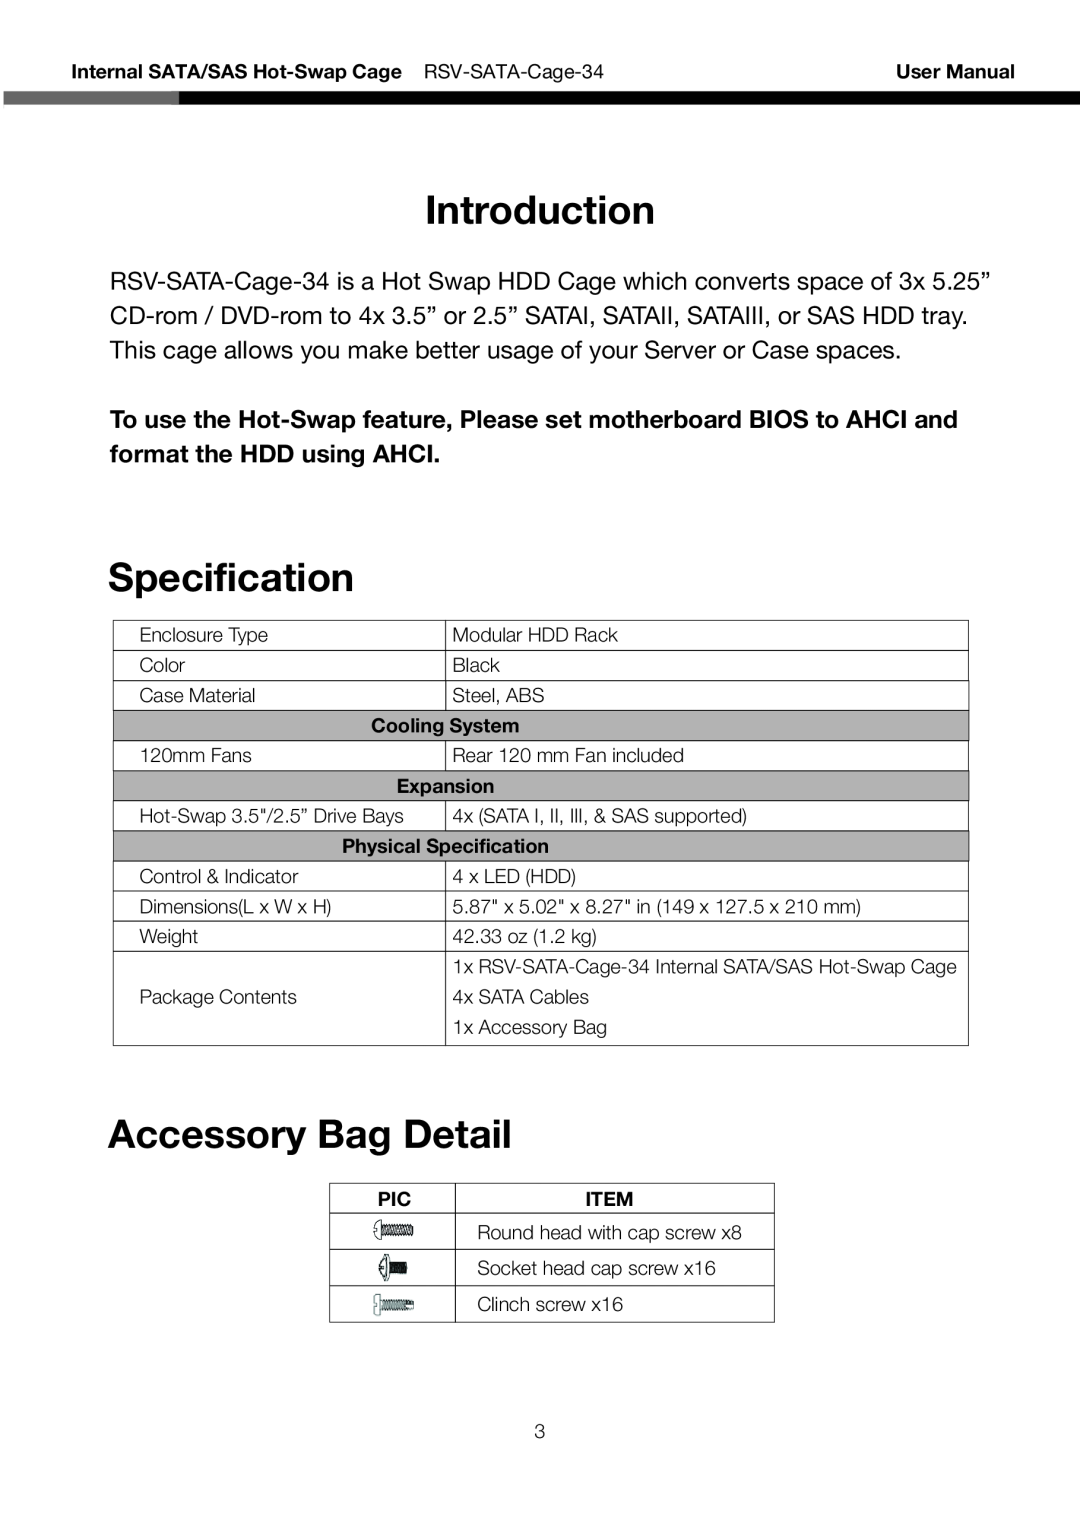 Rosewill RSV-SATA-Cage-34 user manual Introduction, Specification, Accessory Bag Detail, Picitem 